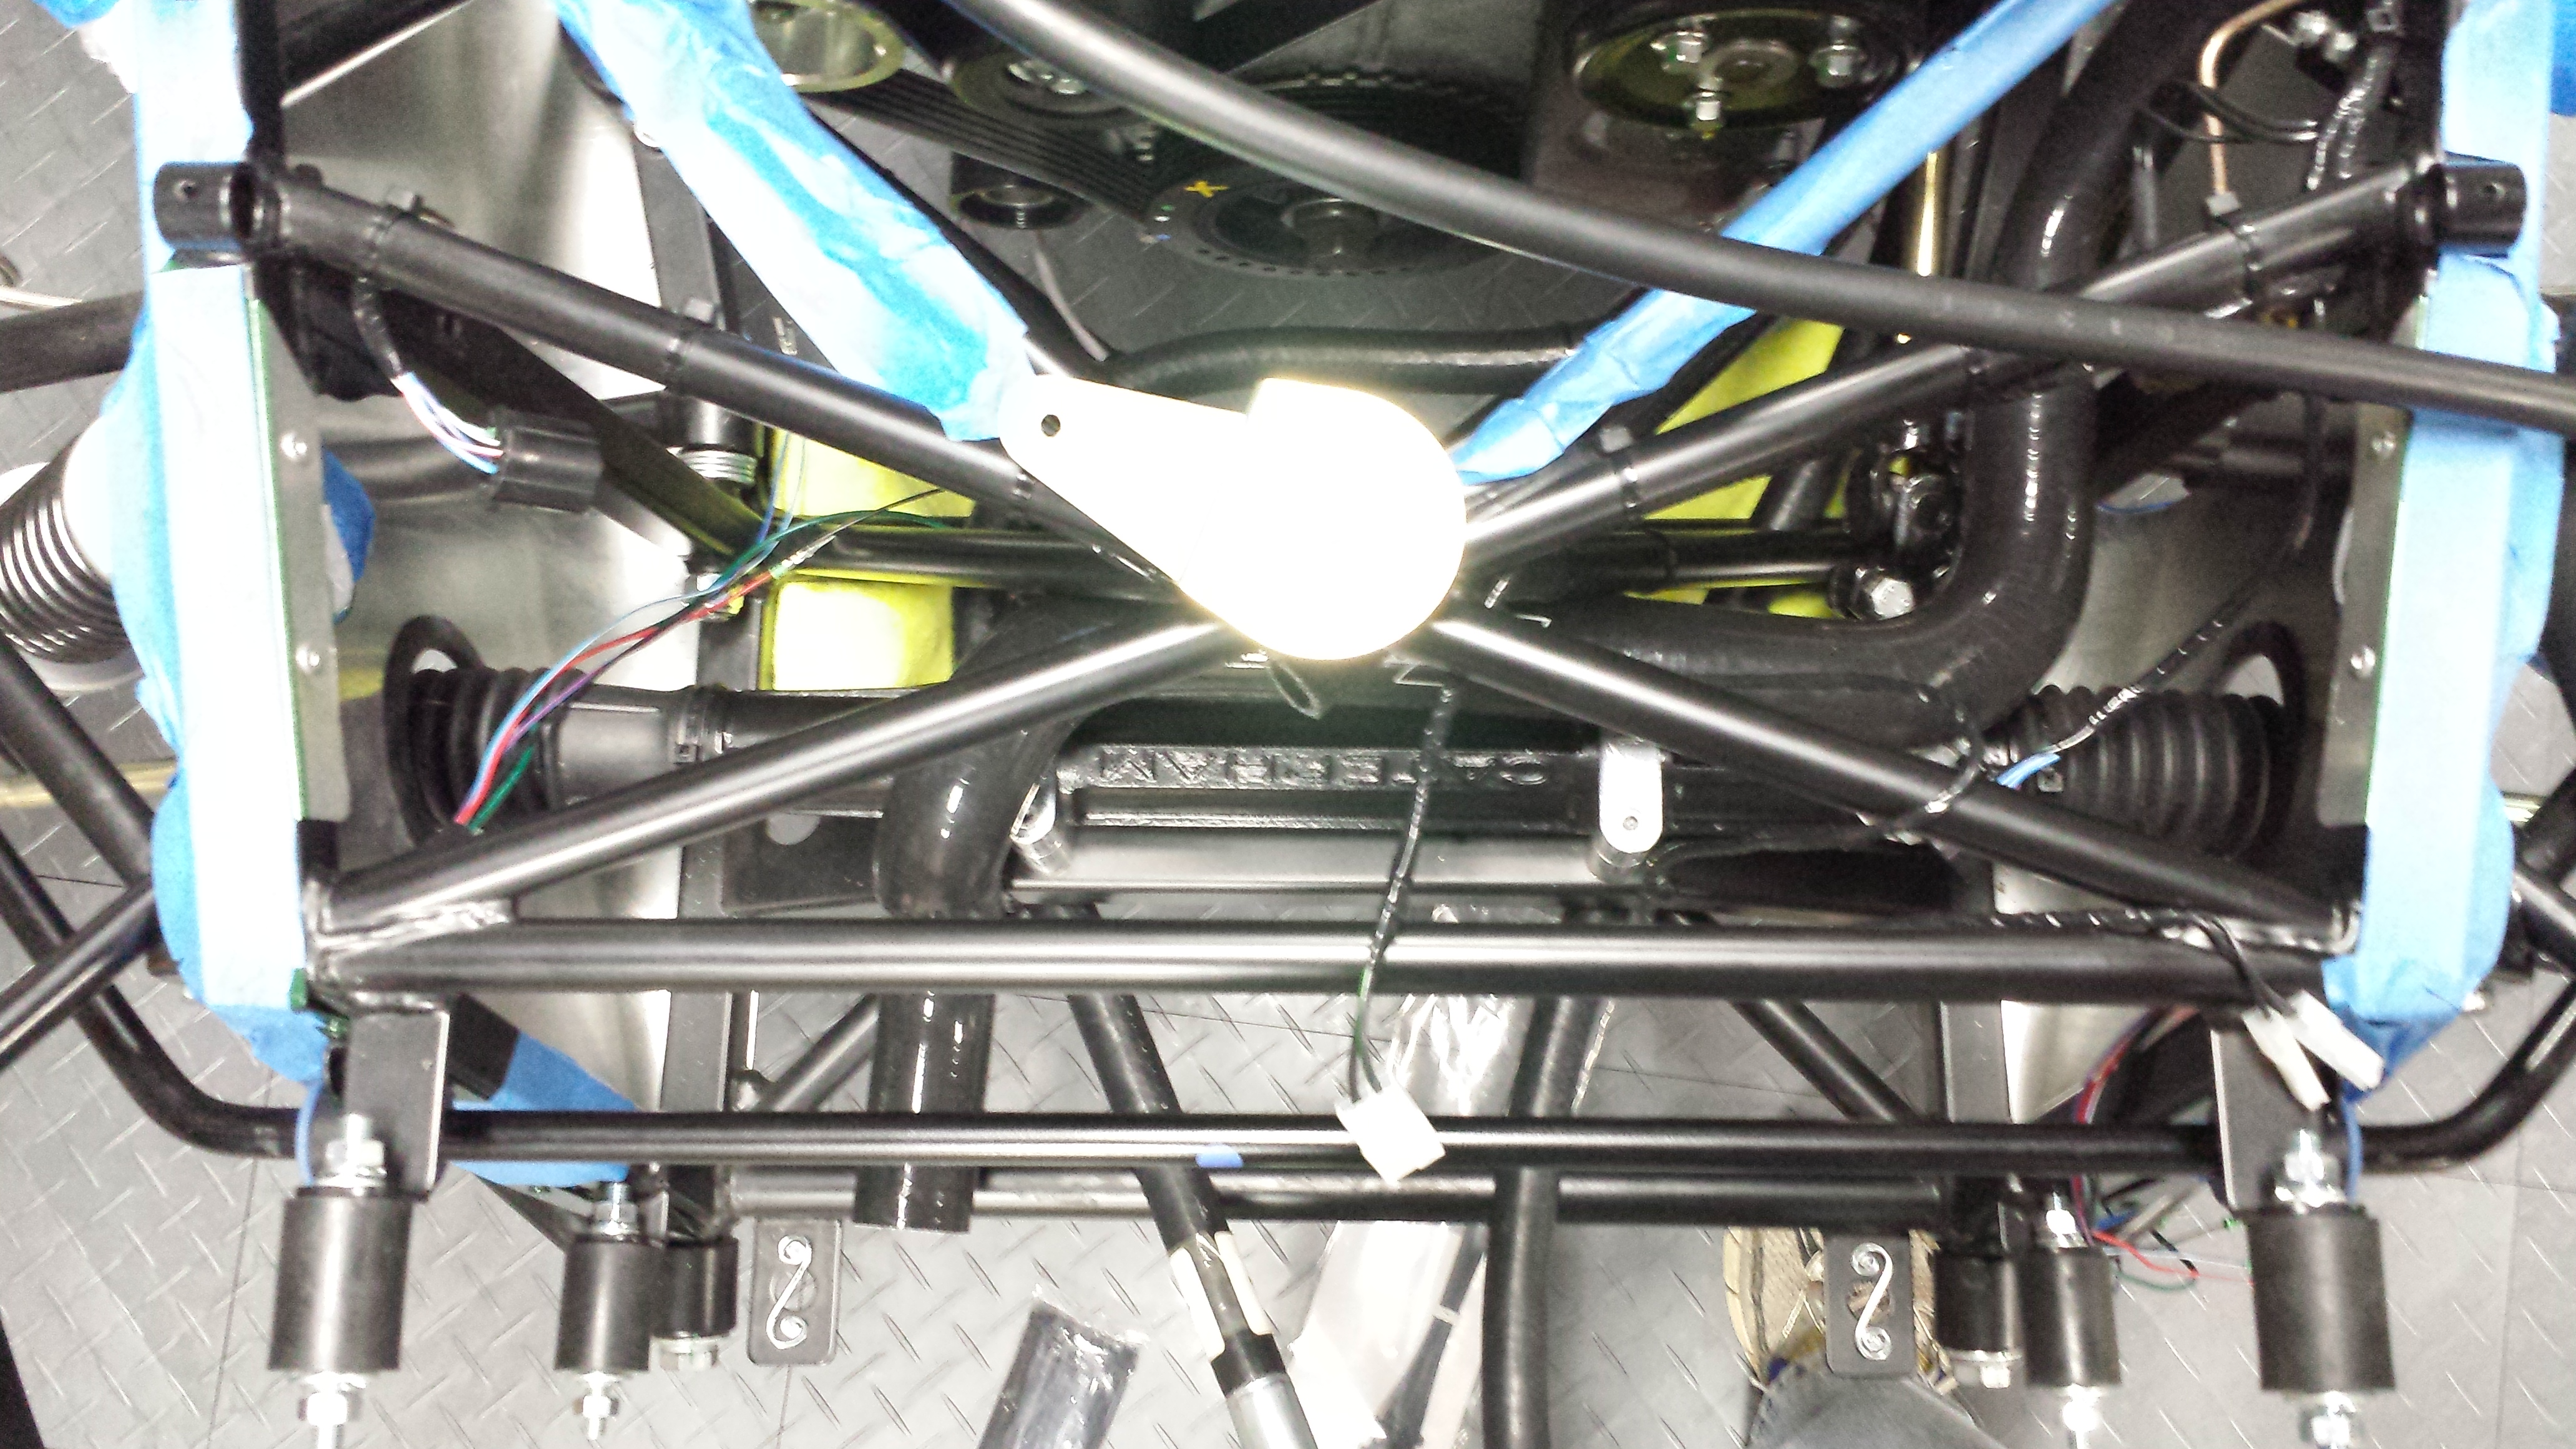 Oil lines at front of chassis